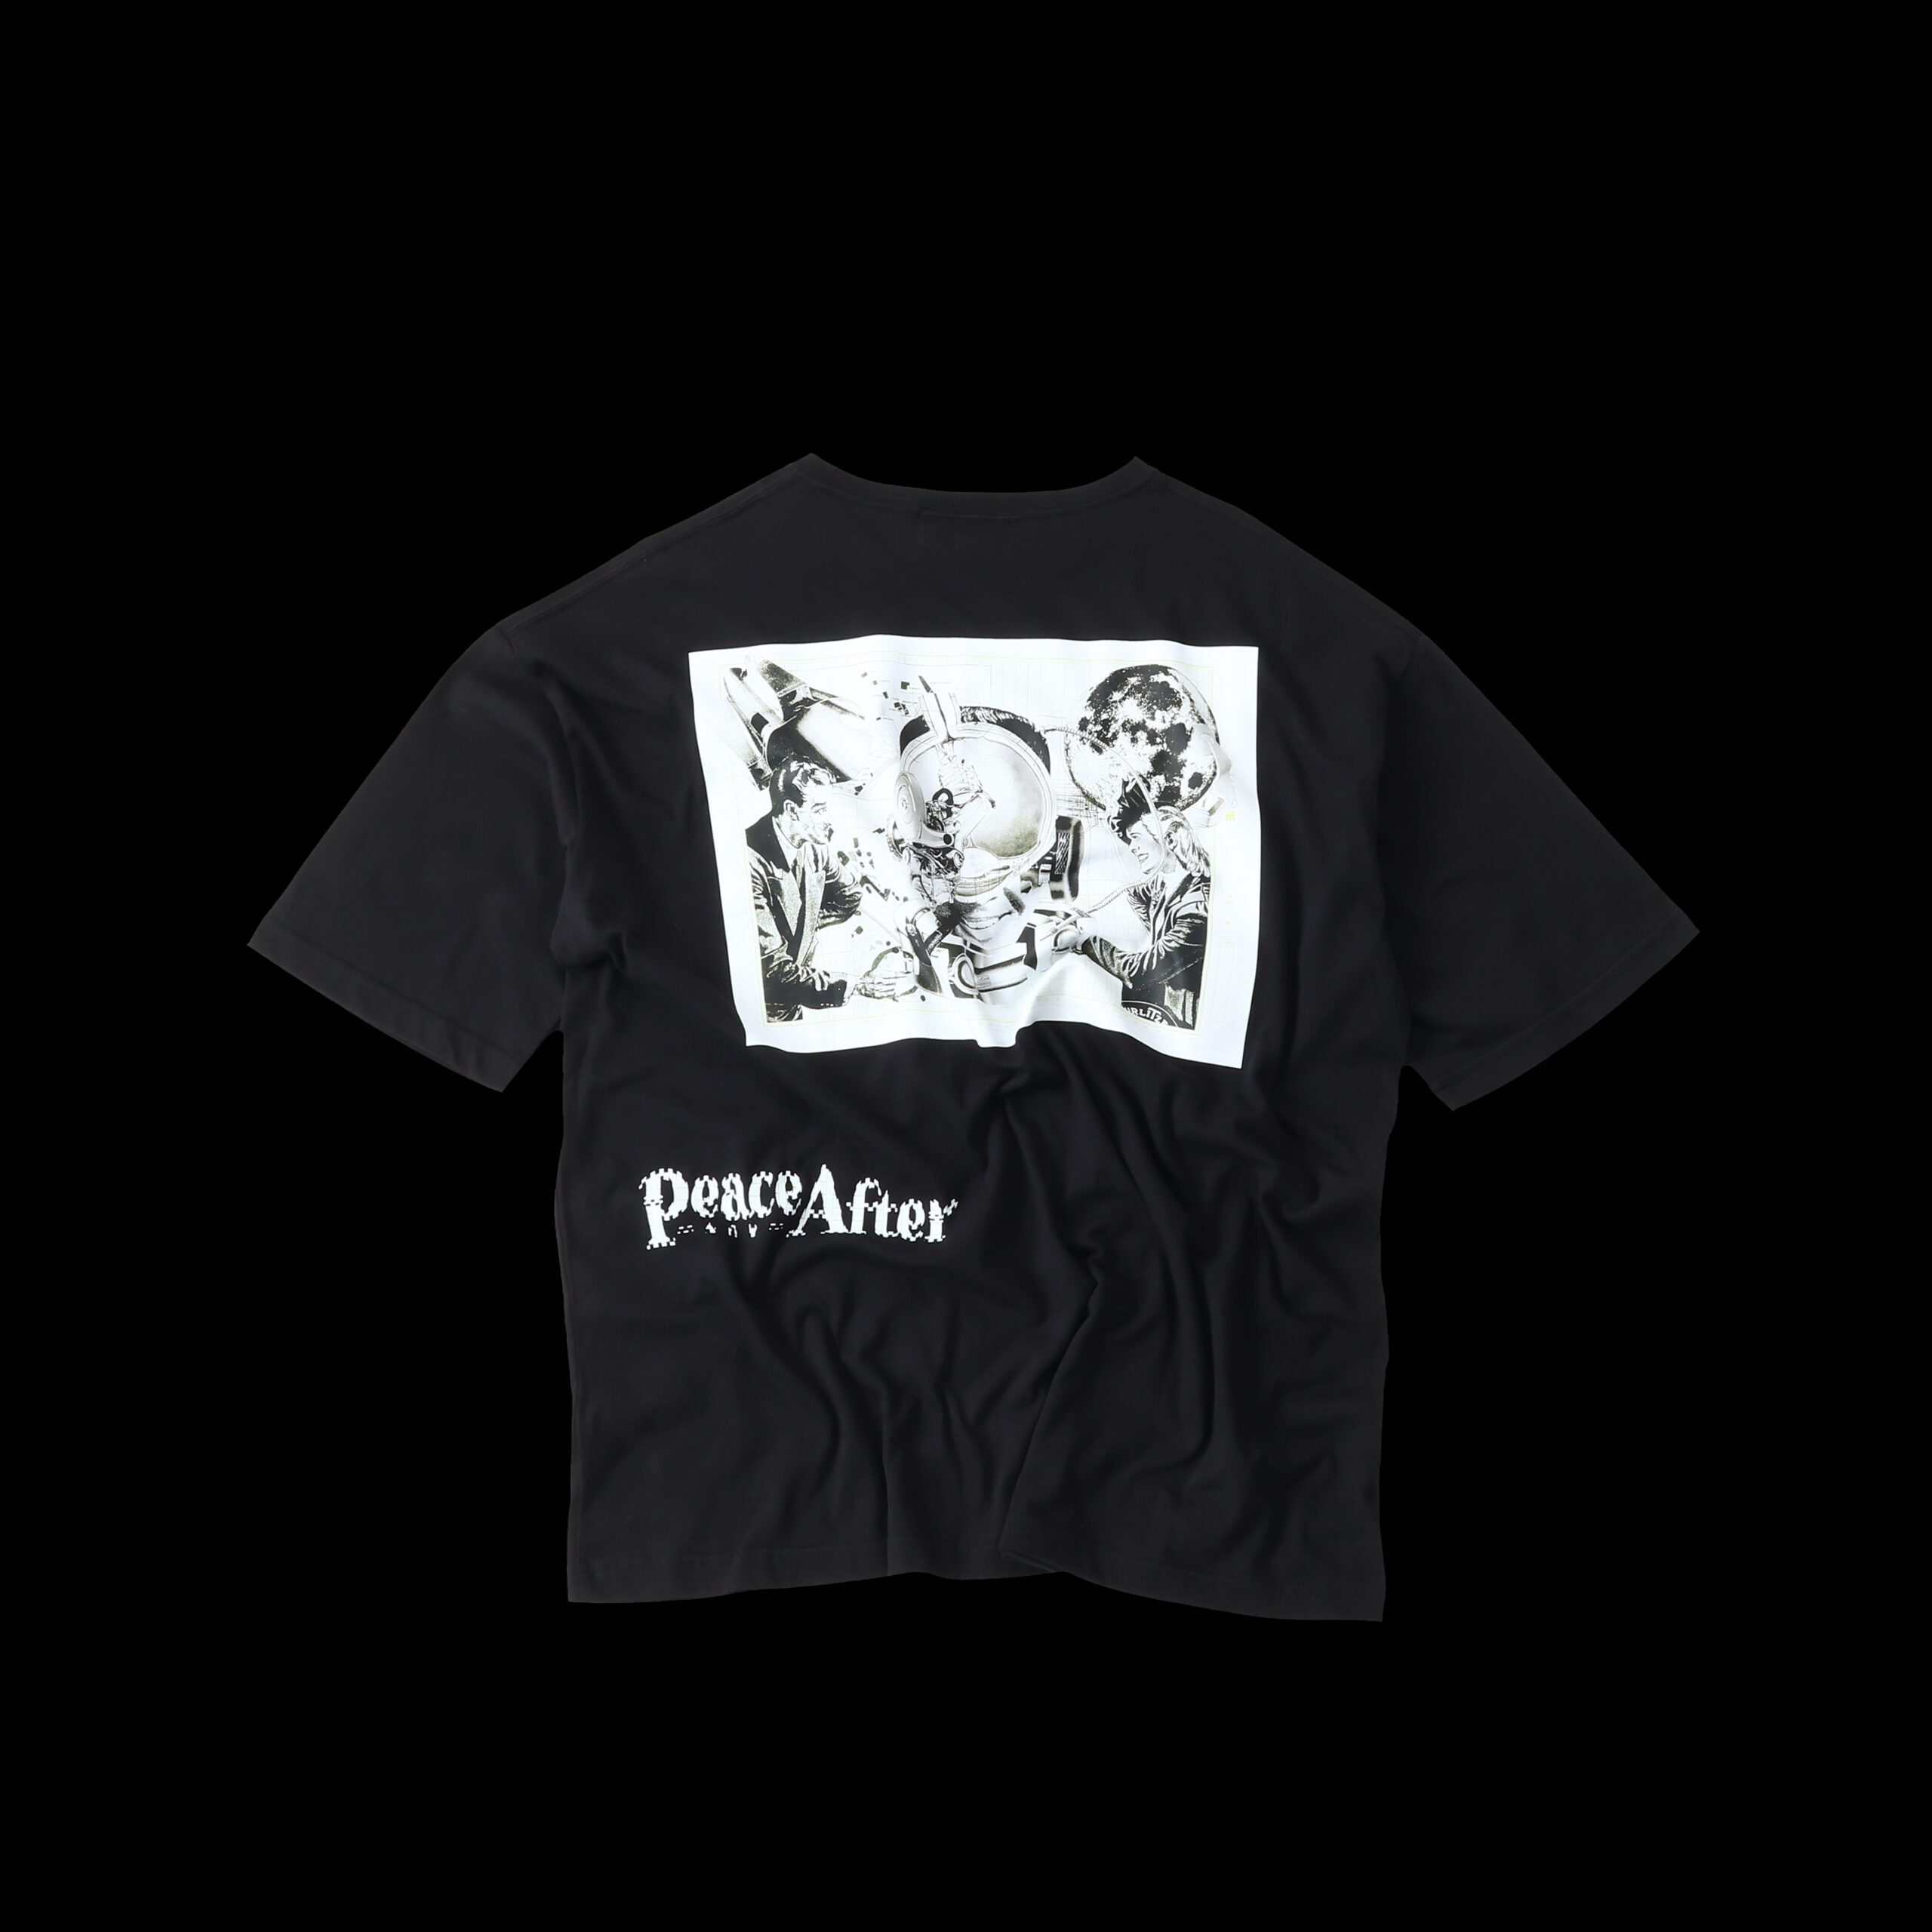 Peace and After x 河村康輔のコラボレーション Tシャツが発売